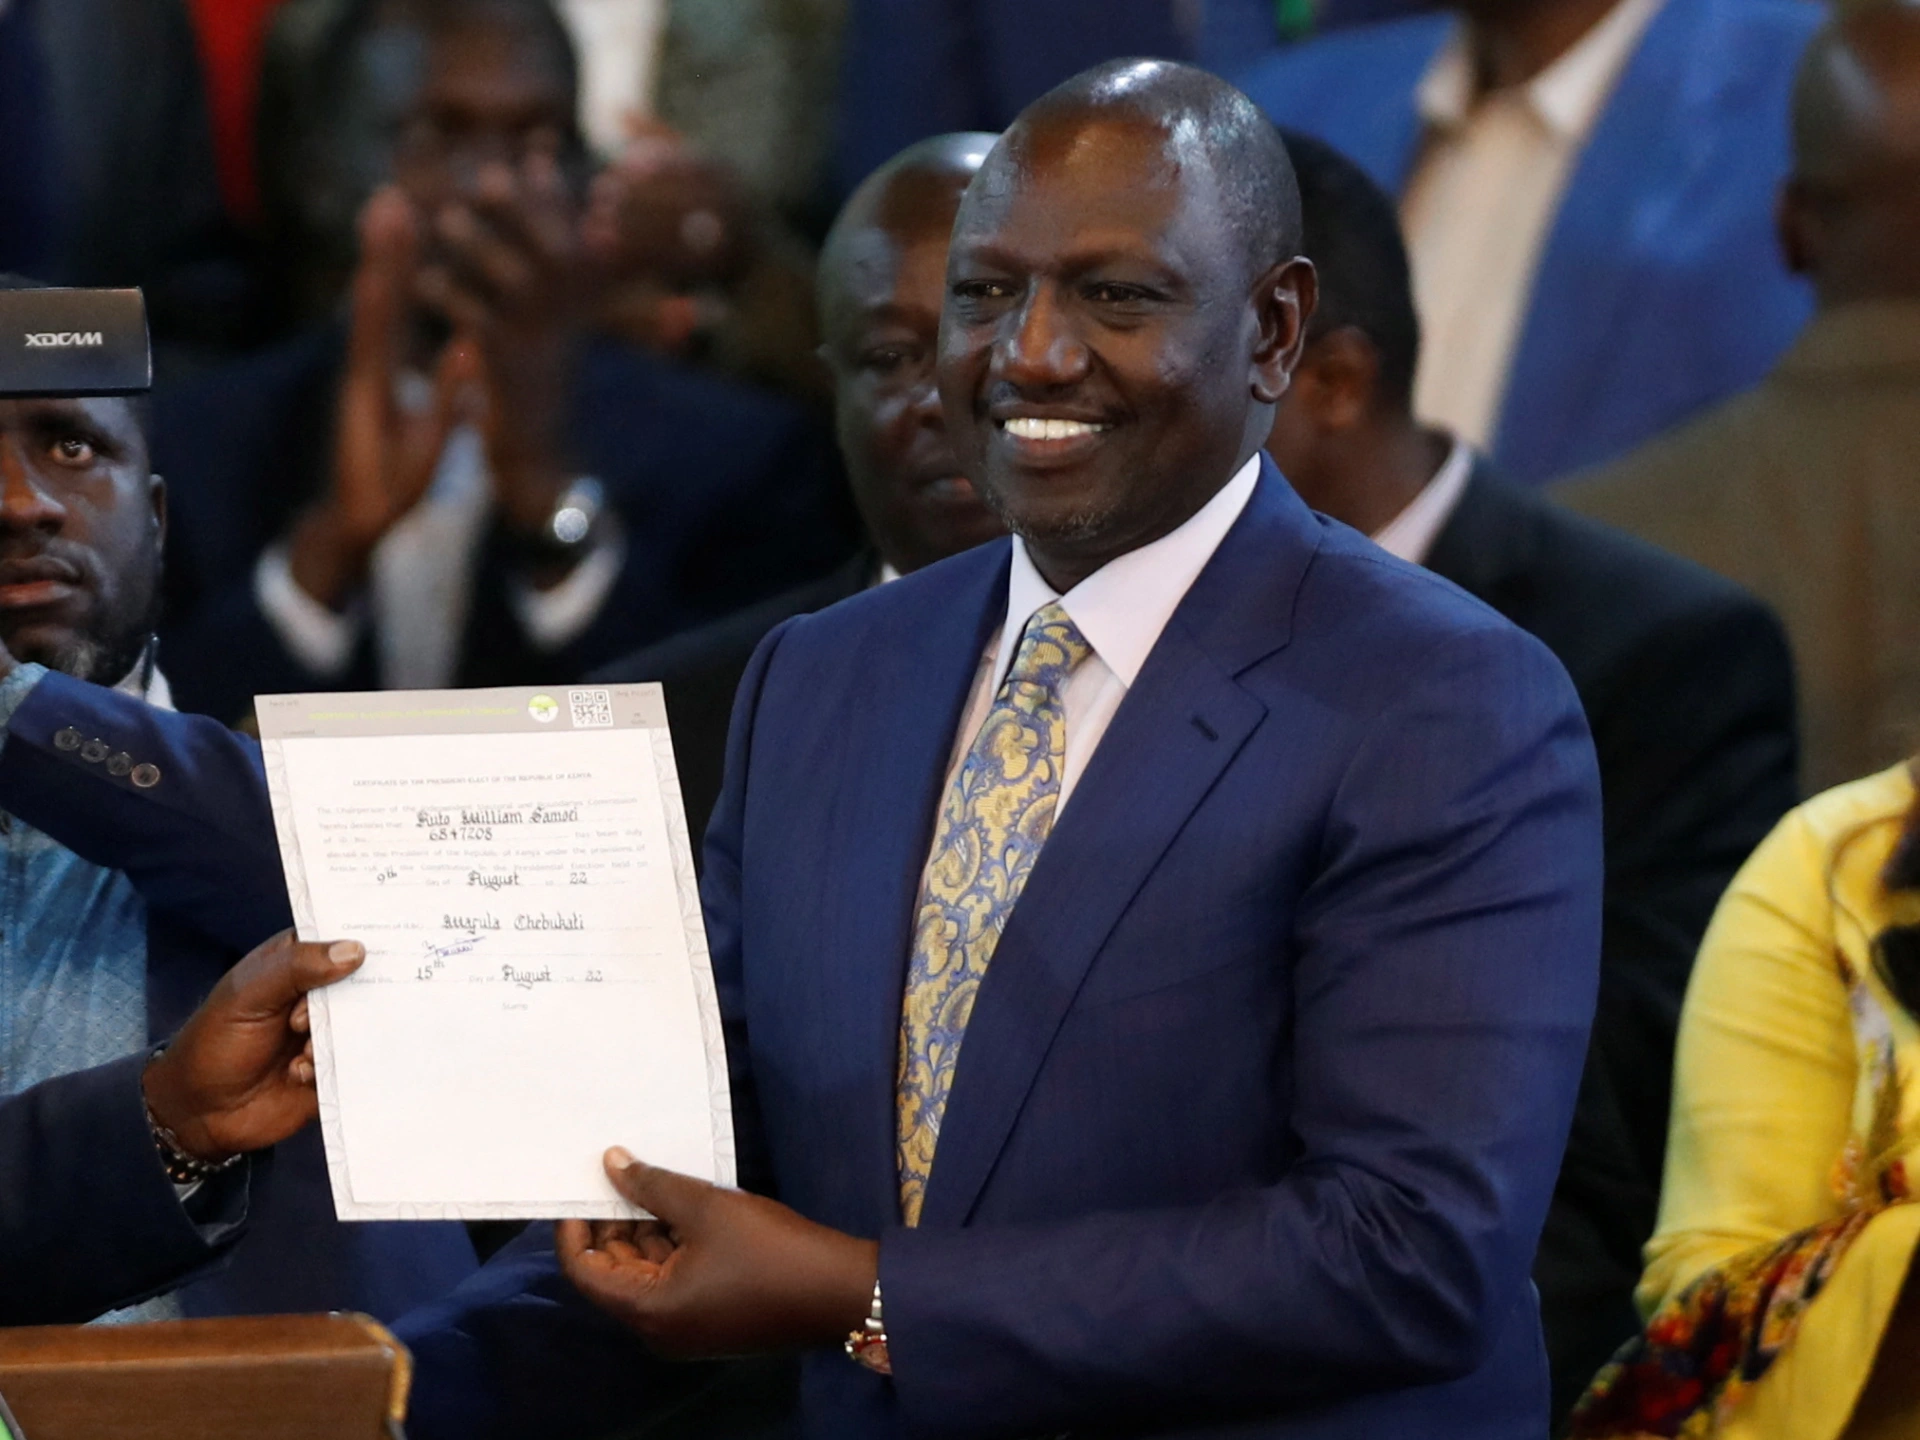 Dr Ruto to begin receiving security briefings after victory